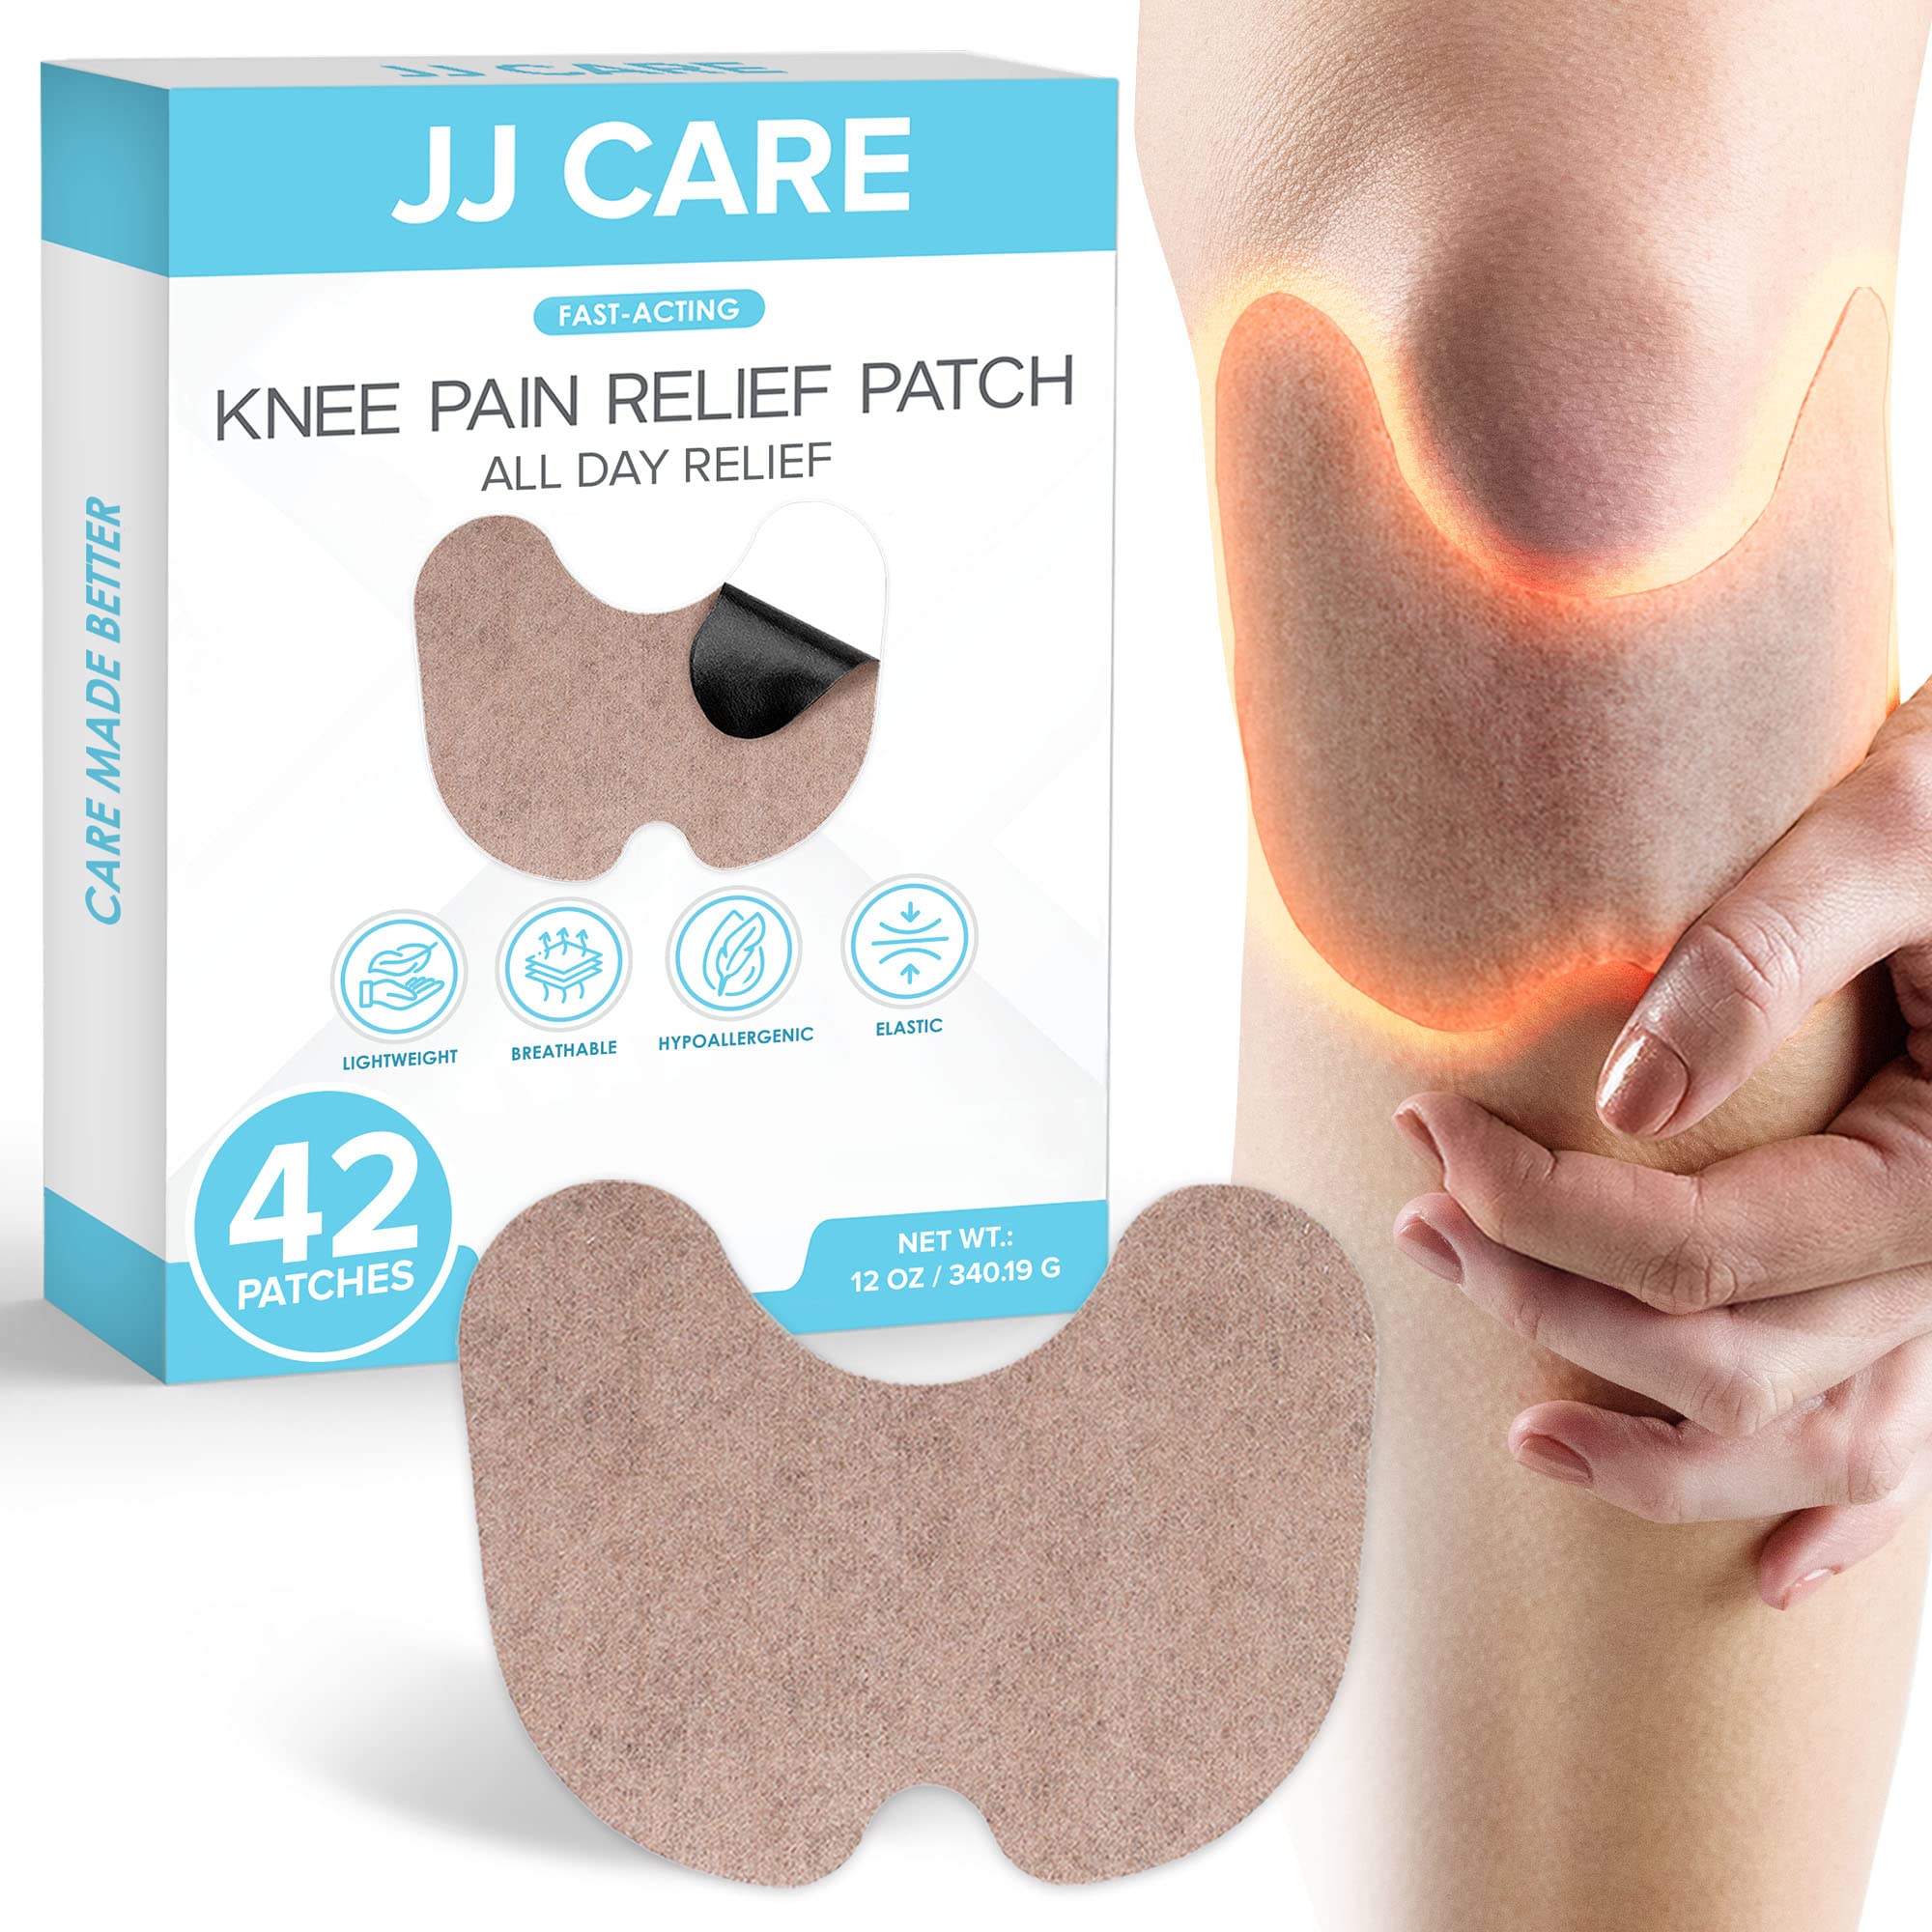 JJ CARE Knee Patches - 42 Pcs Knee Patches for Pain Relief Extra Strength -  5.5 x 3.9 Pain Relief Patch for Knee Knee Pain Relief Patch for Arthritis  Inflammation Sciatica Muscle & Joint